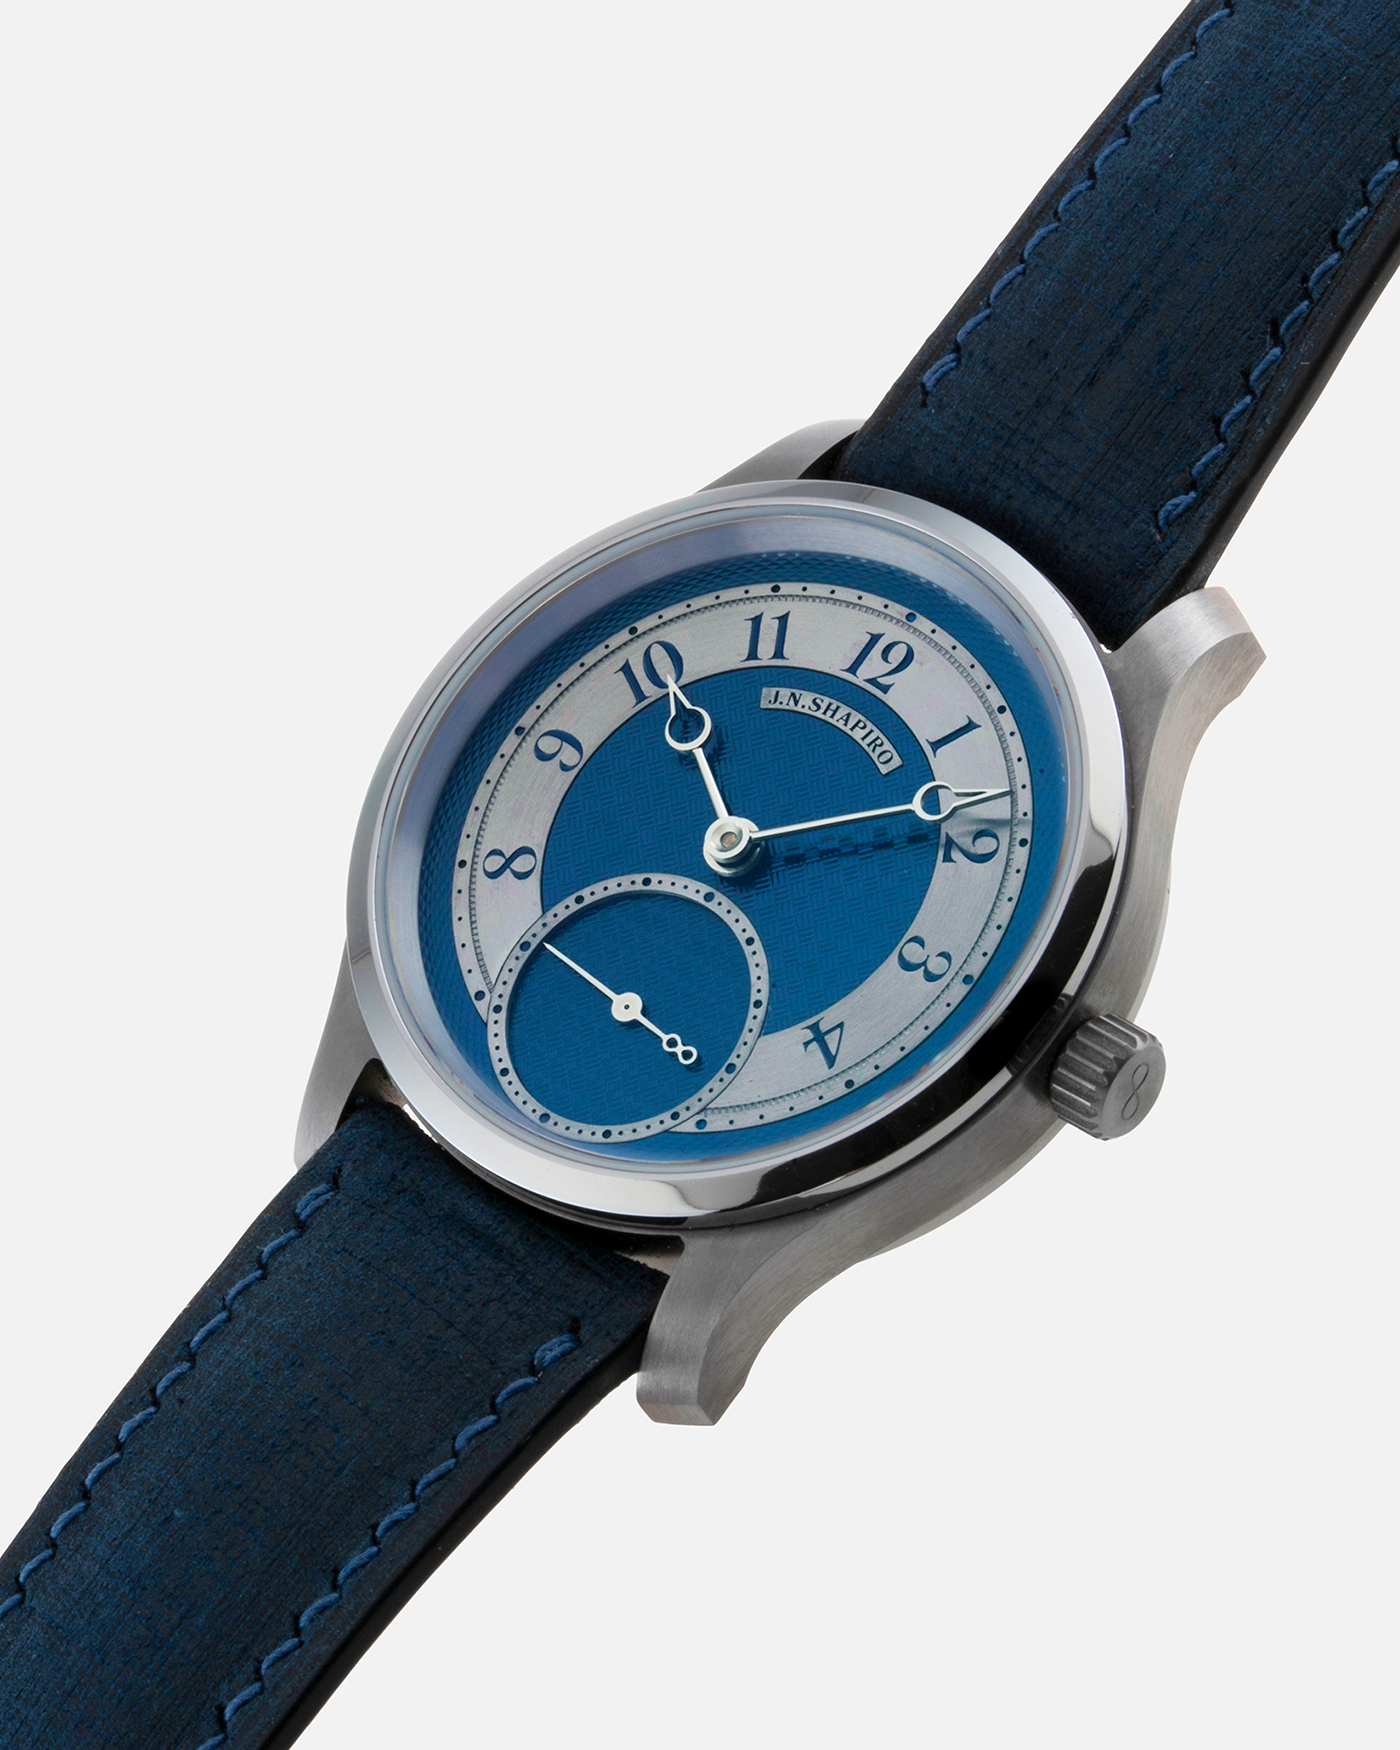 Brand: J.N. Shapiro Year: 2021 Model: Infinity Tantalum  Material: Tantalum Movement: UWD Cal. 33.1, Manual-Winding Case Diameter: 39mm Bracelet/Strap: J.N. Shapiro by Delugs Navy Blue Leather Strap with Signed Tantalum Tang Buckle with additional J.N. Shapiro Blue Alligator Strap and Grey Suede Strap